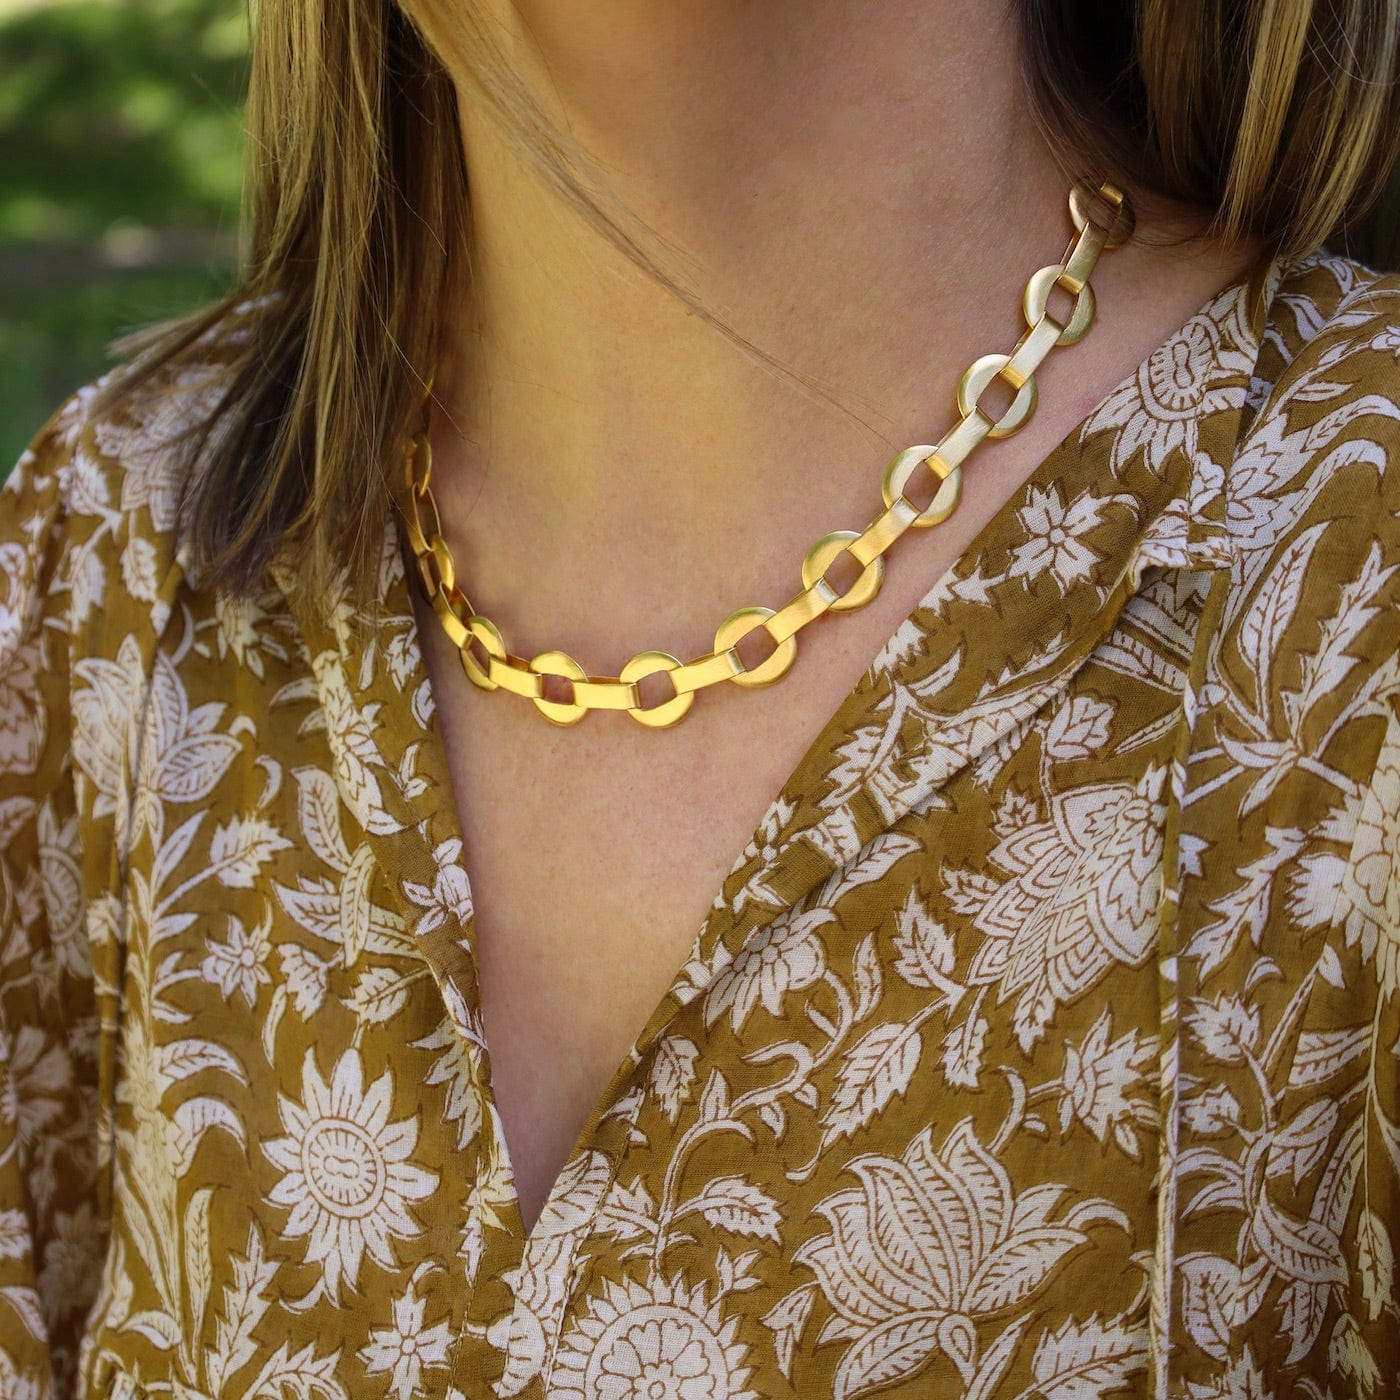 NKL-GPL Disc Chain Necklace 20"- Gold Plated Brass